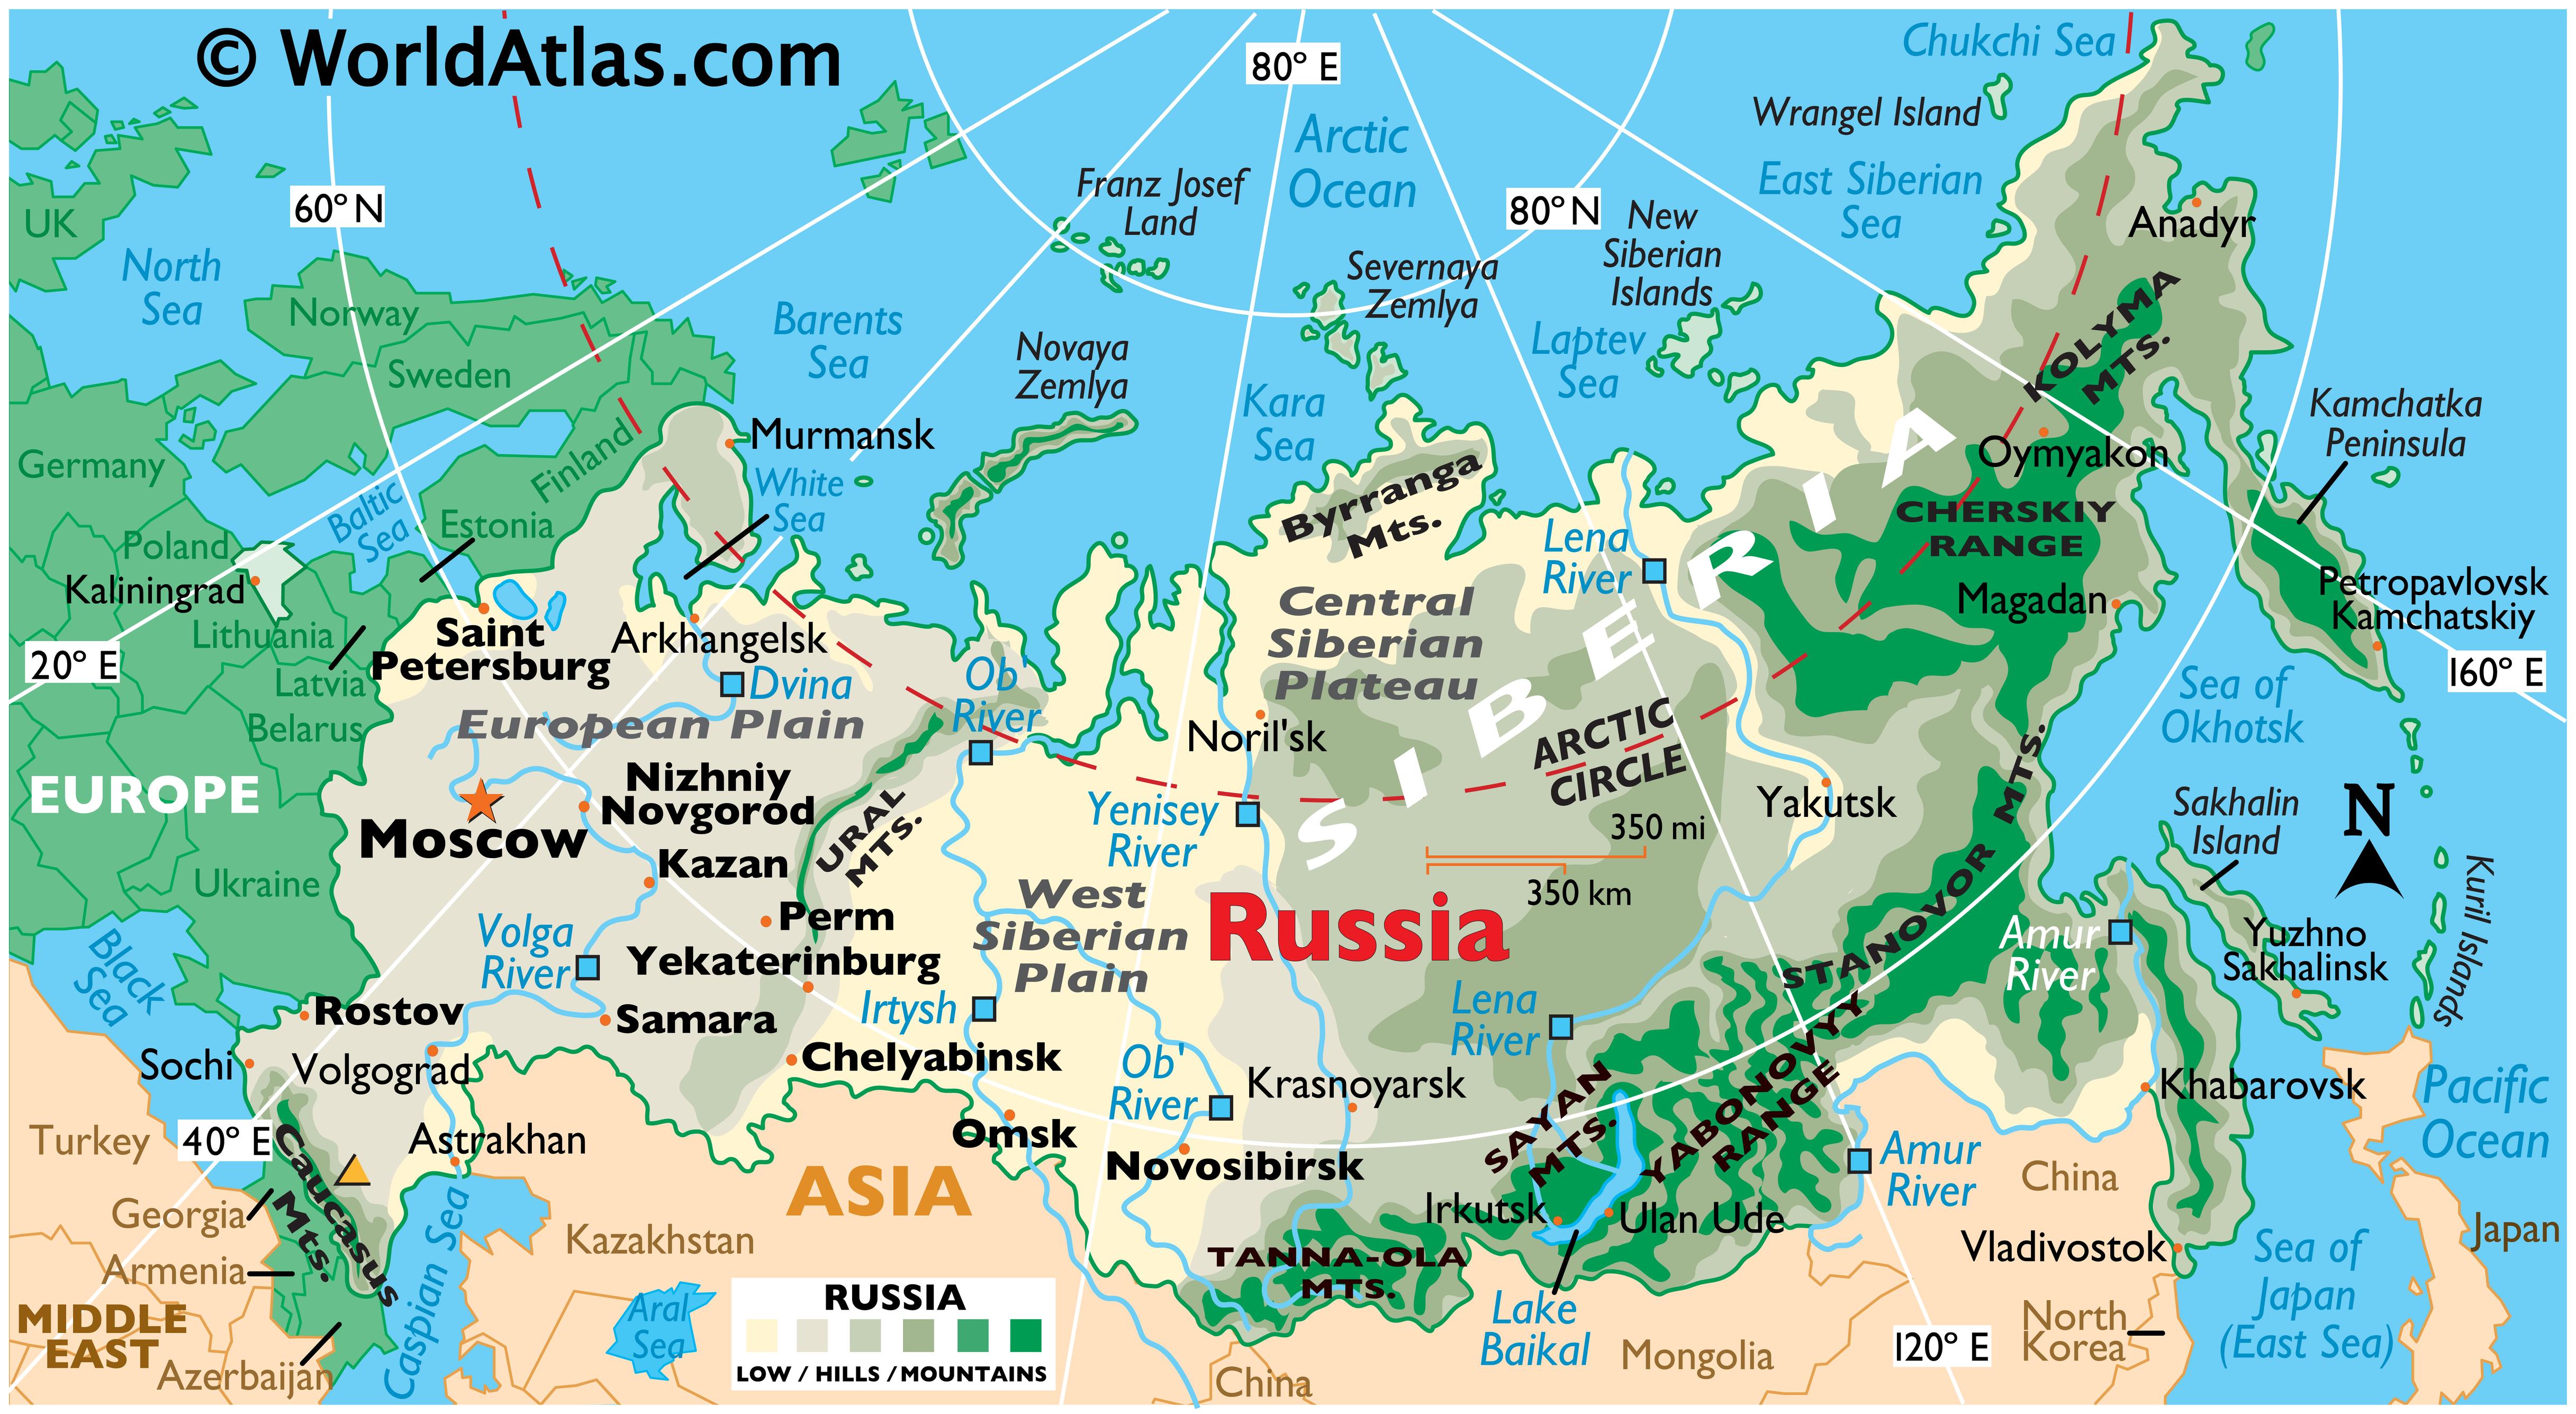 Physical map of Russia showing its state boundaries, relief, major rivers, extreme points, national parks, major cities, Lake Baikal, and more.